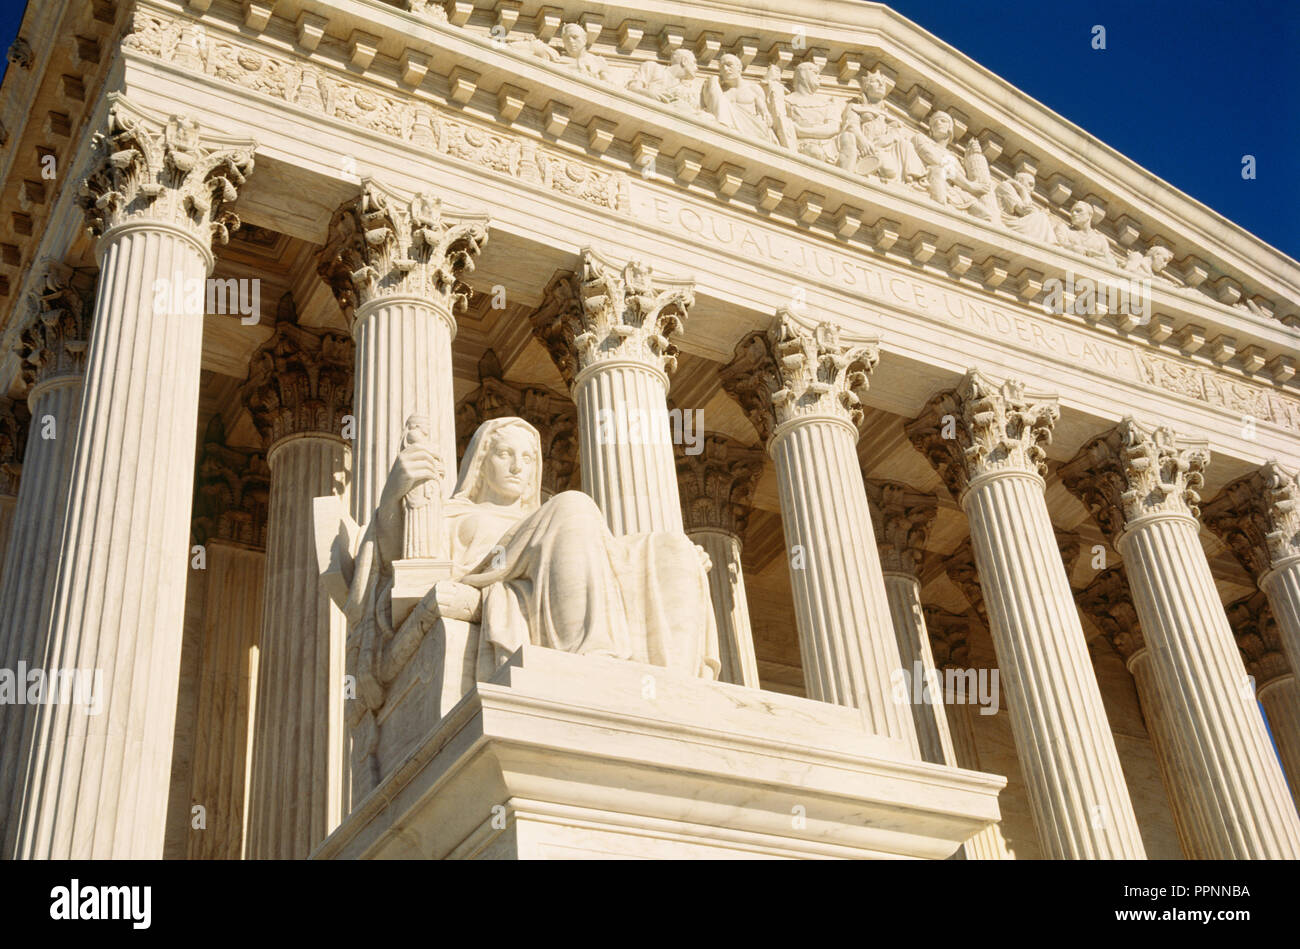 The Supreme Court of the United States is in Washington D.C., USA Stock Photo